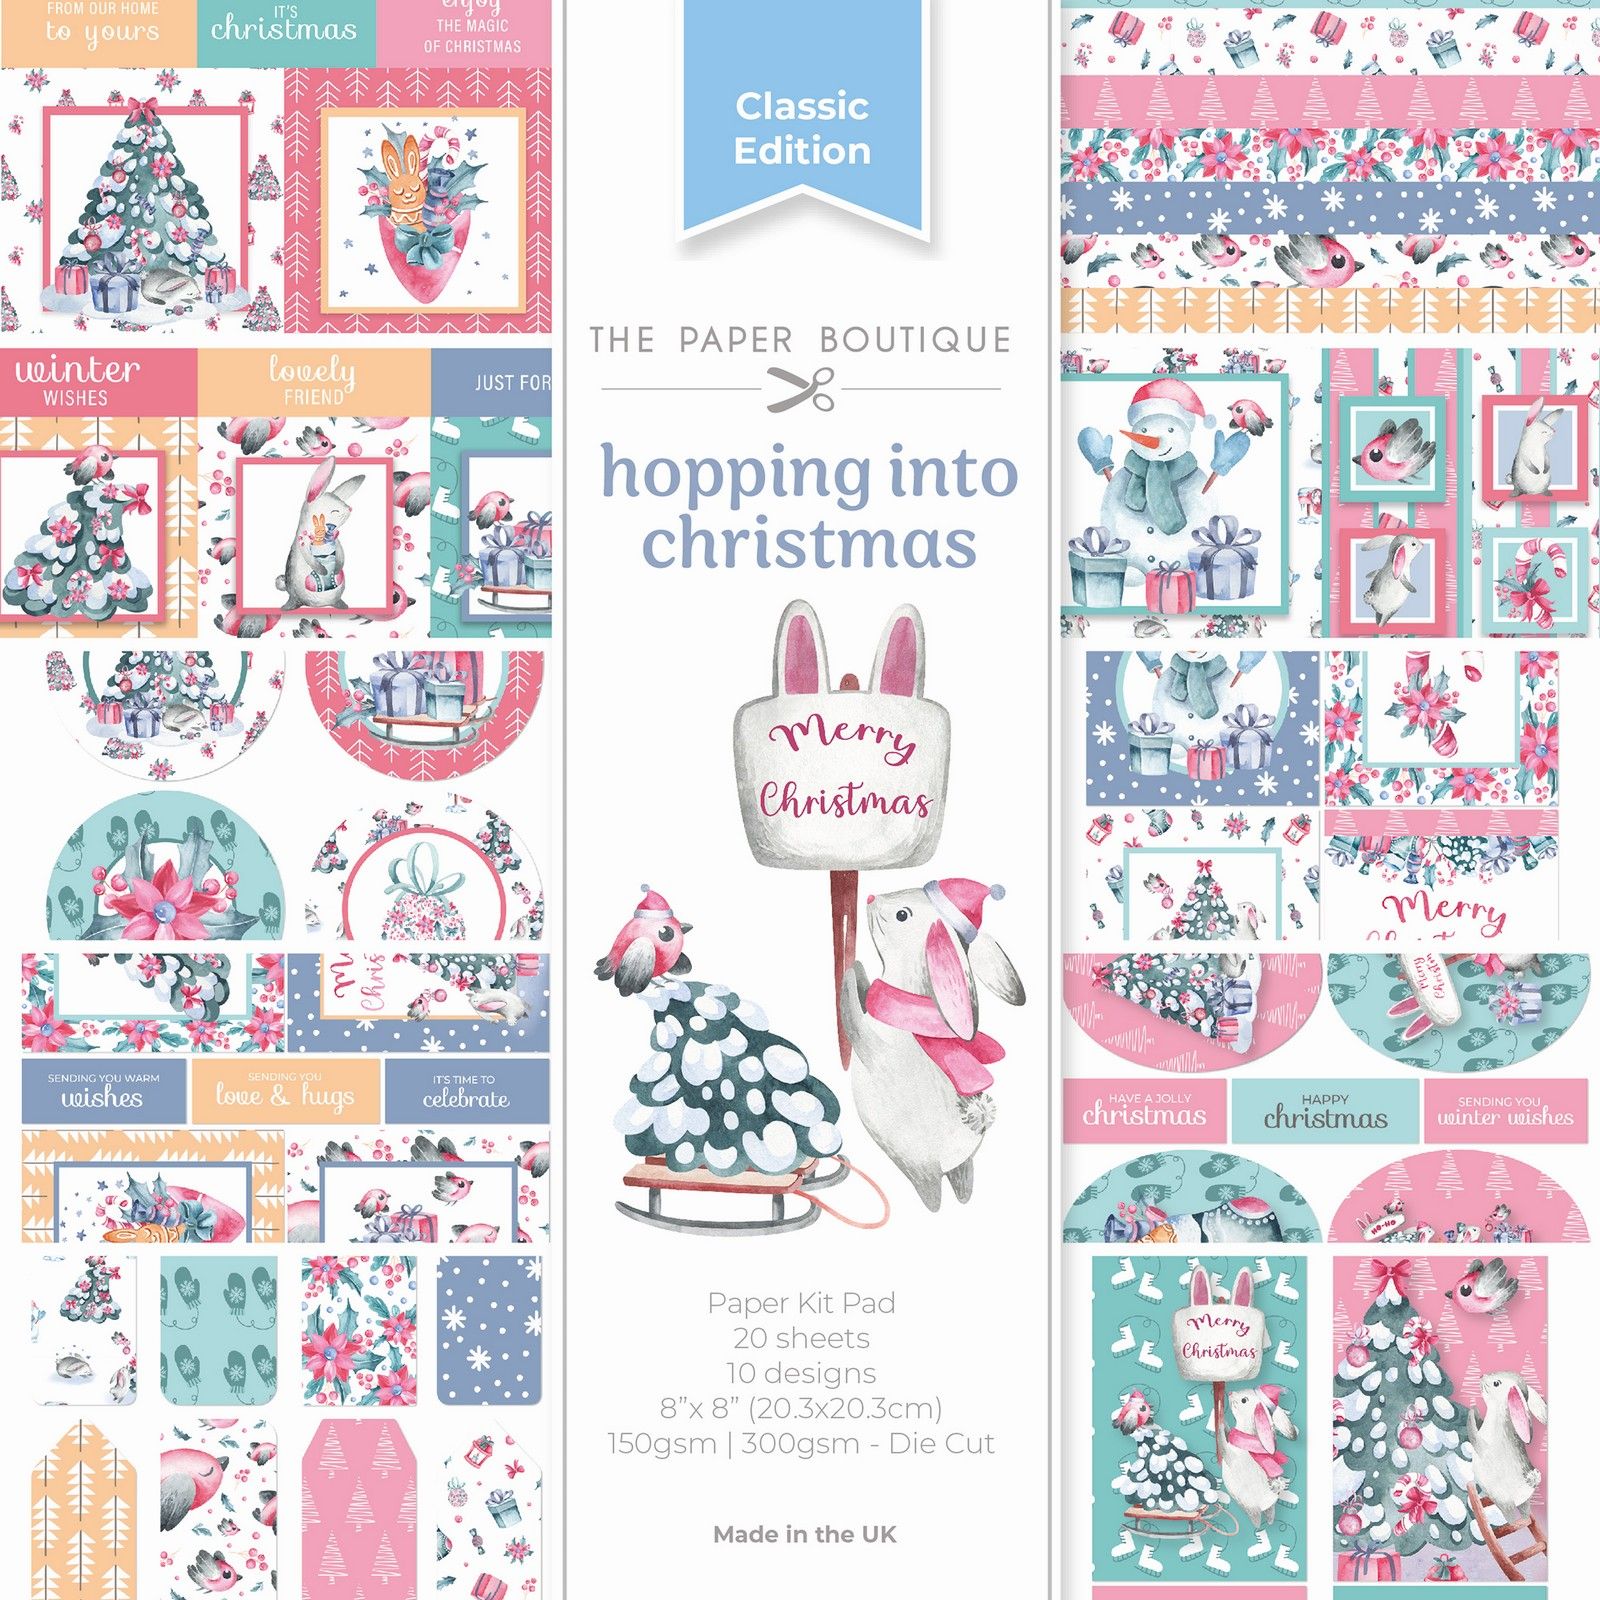 The Paper Boutique • Hopping into Christmas Paper Kit Pad 20,3x20,3cm